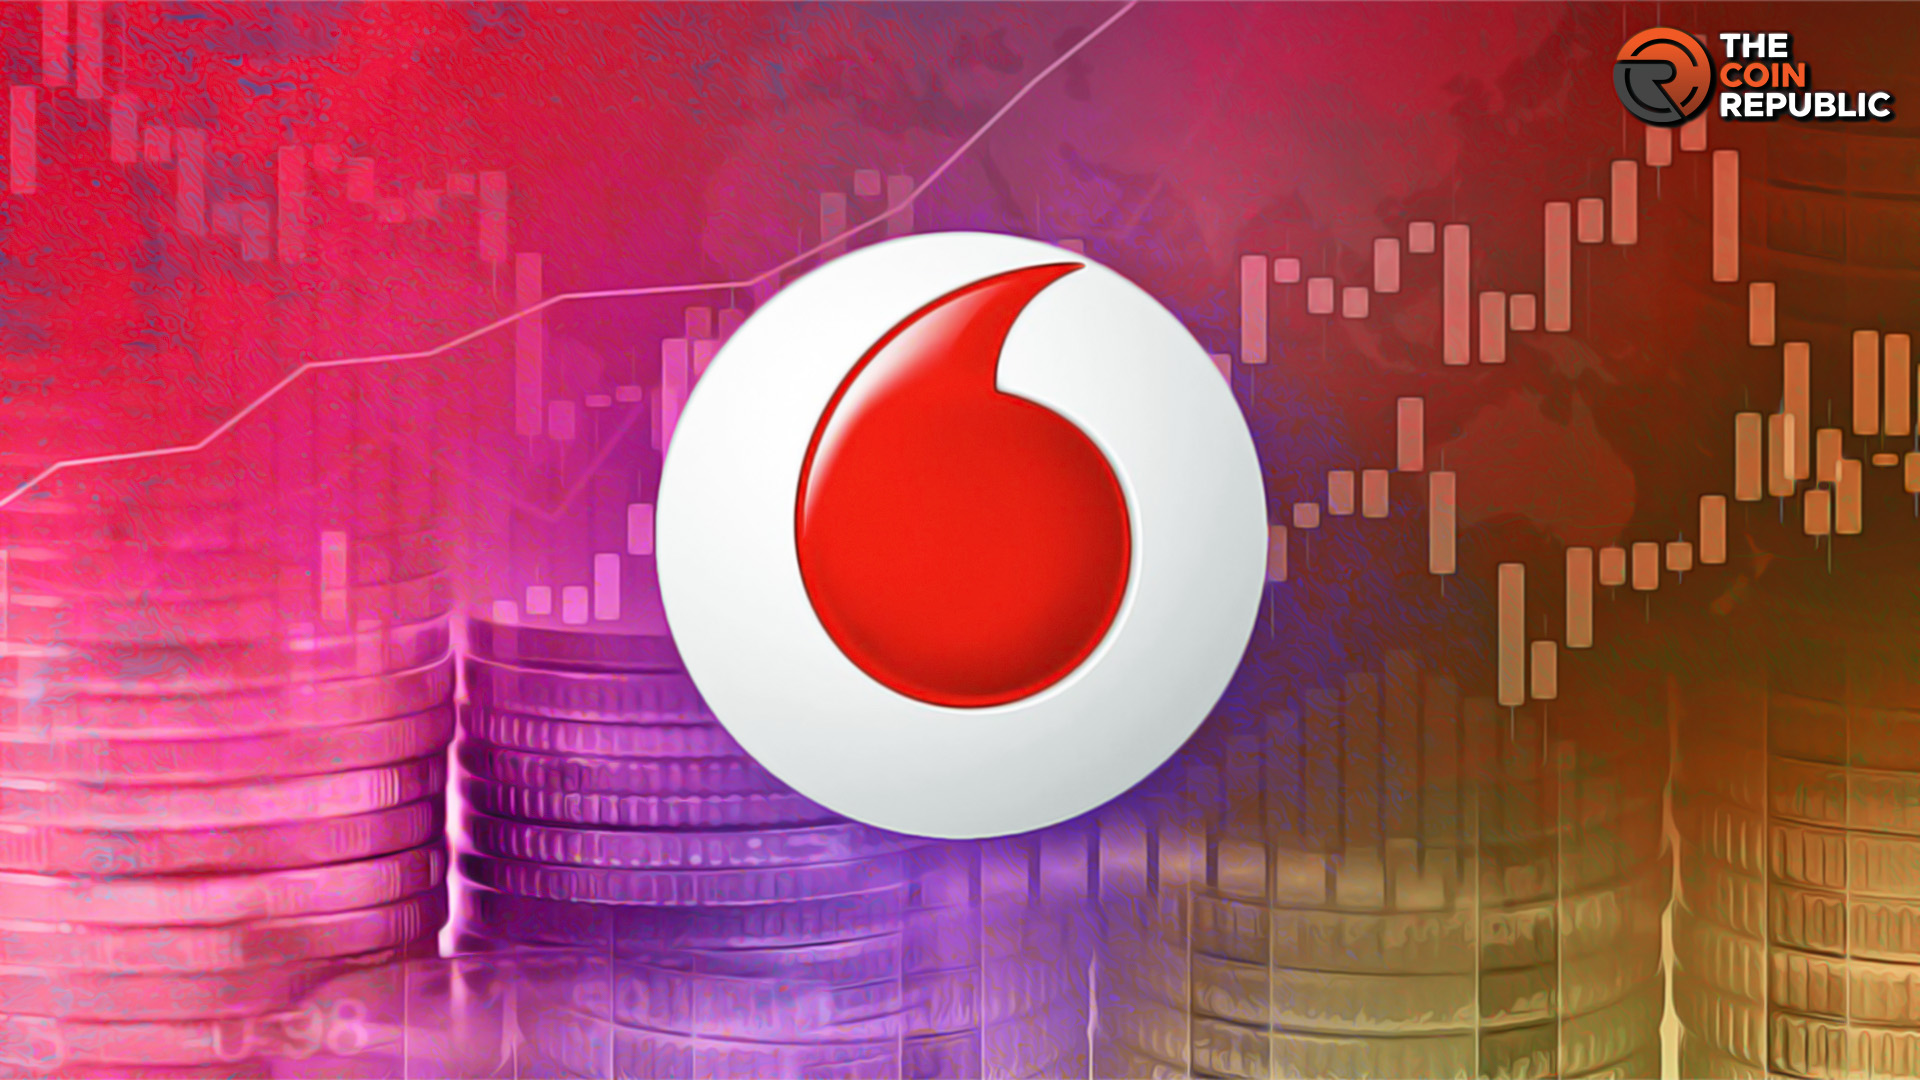 Vodafone Group (VOD) Stock Showed Bearish Trend in YTD Analy